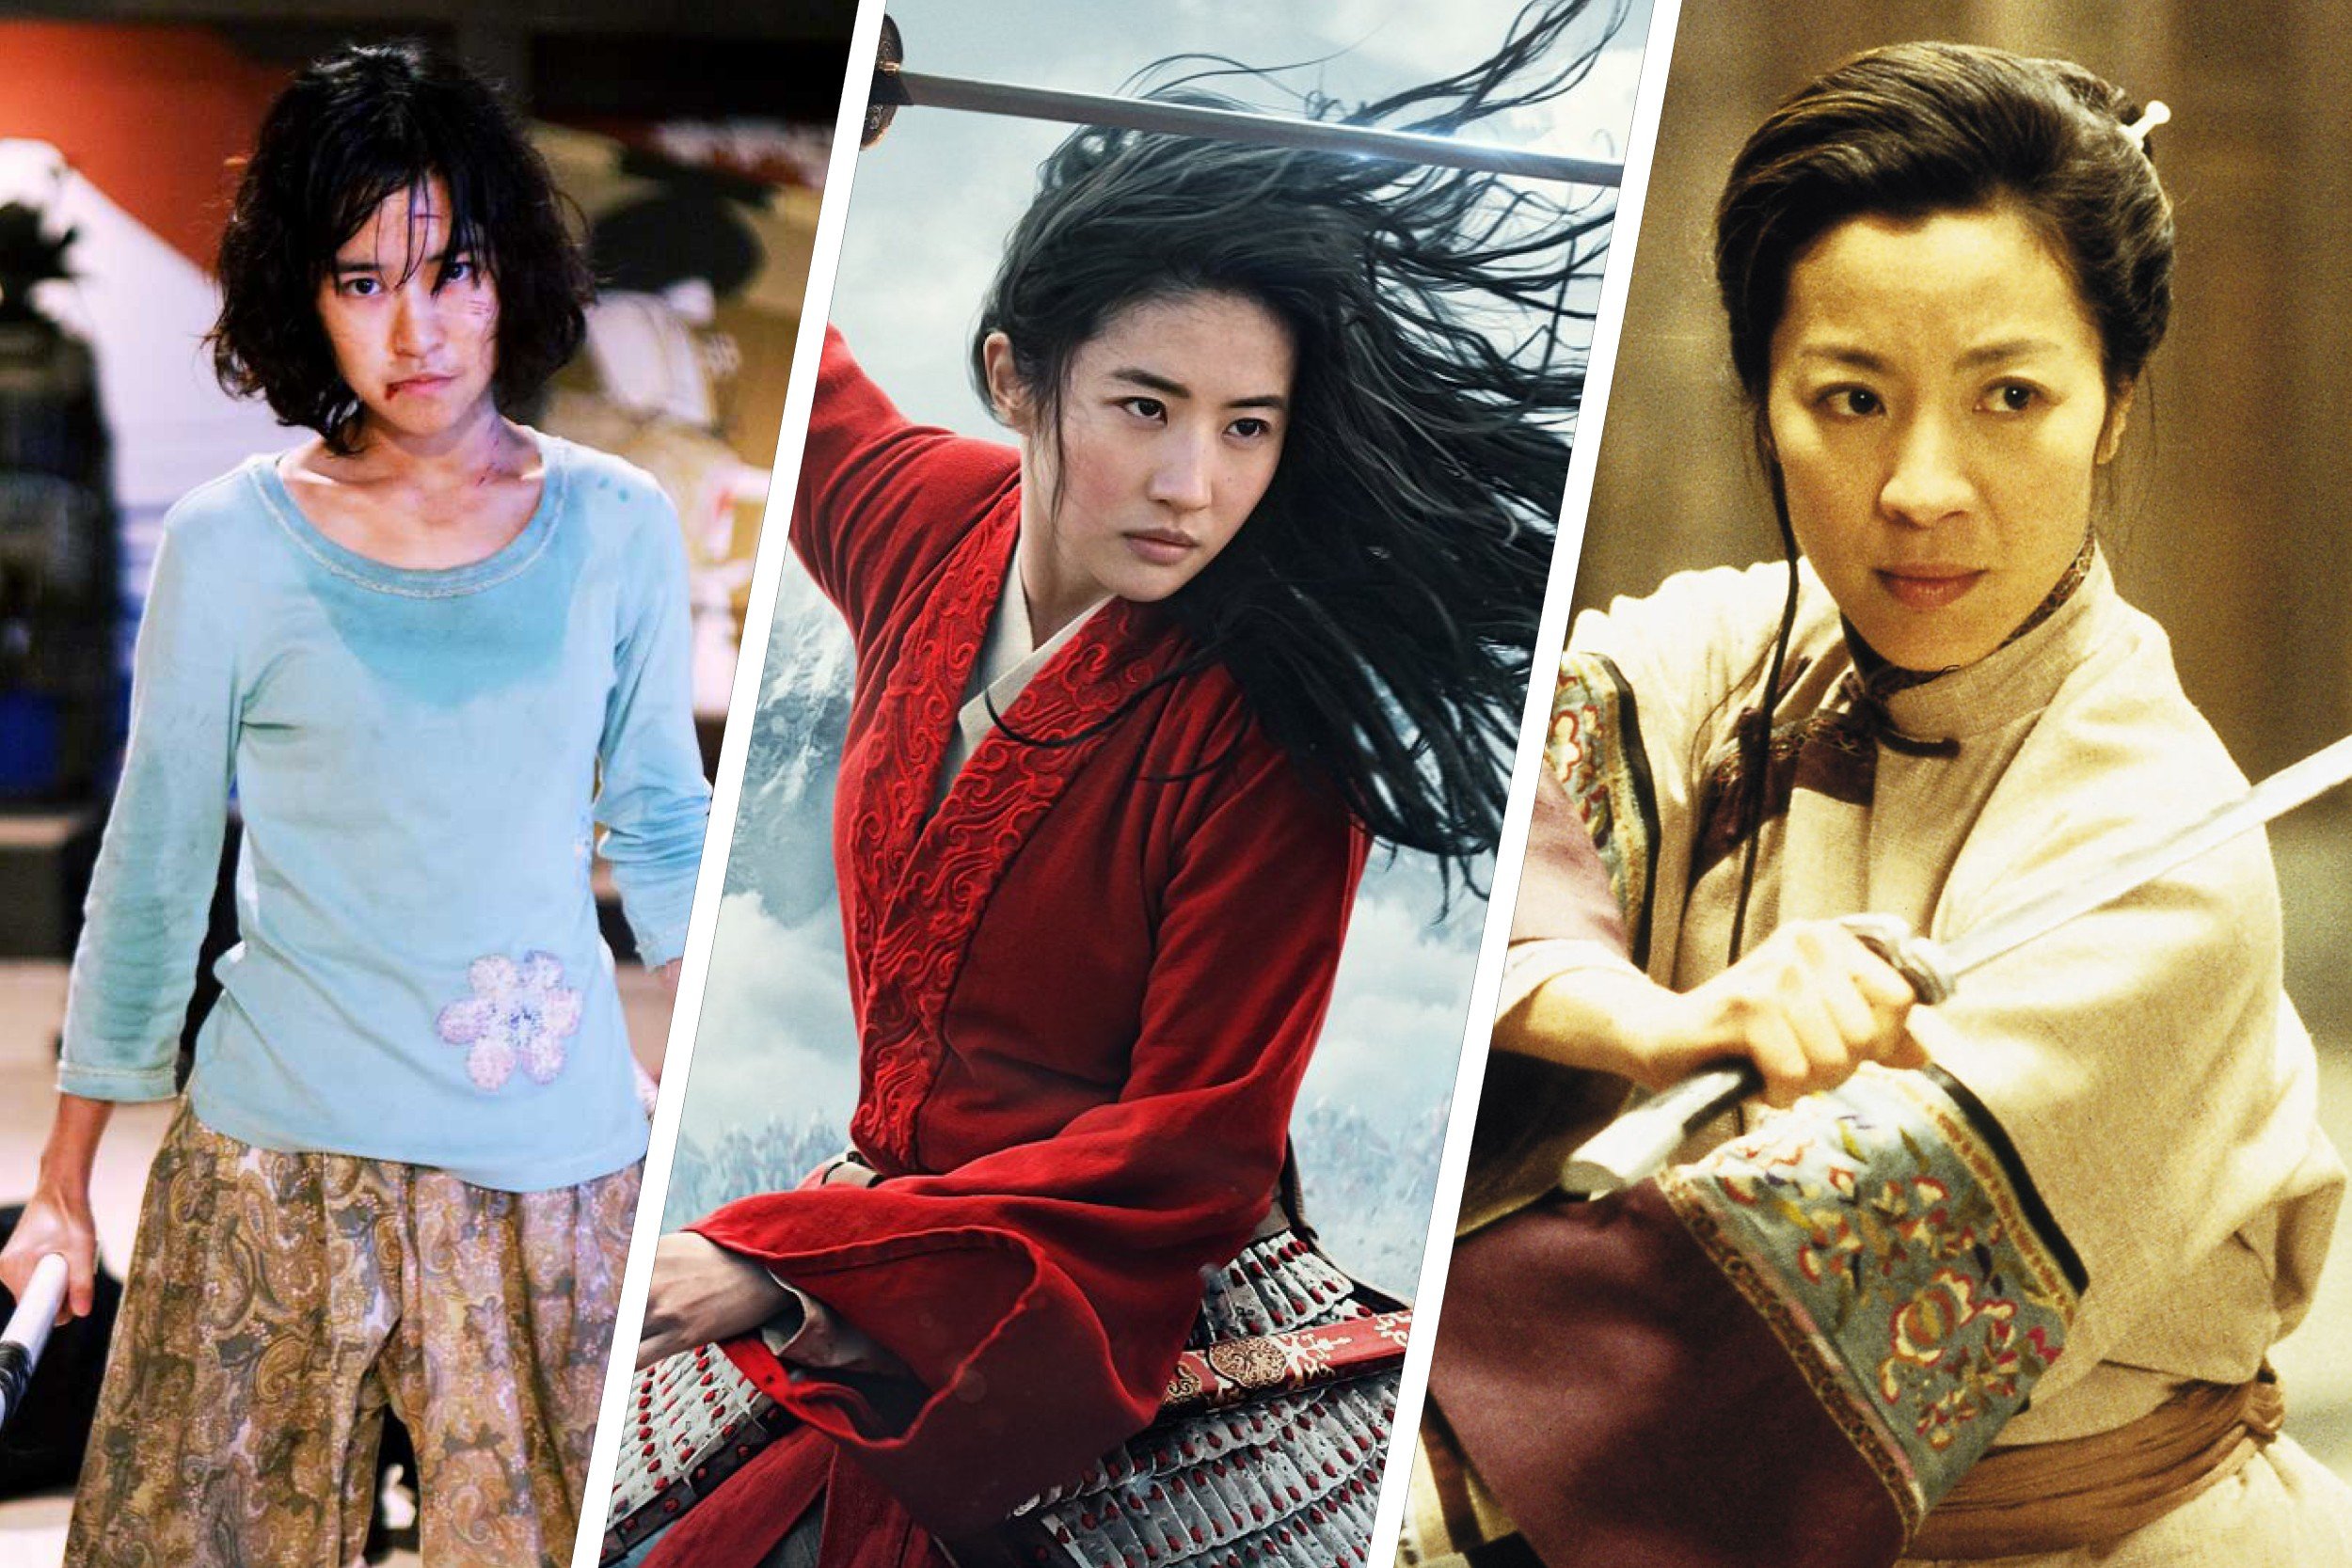 57 Asian Actors and Actresses in Hollywood You Should Know